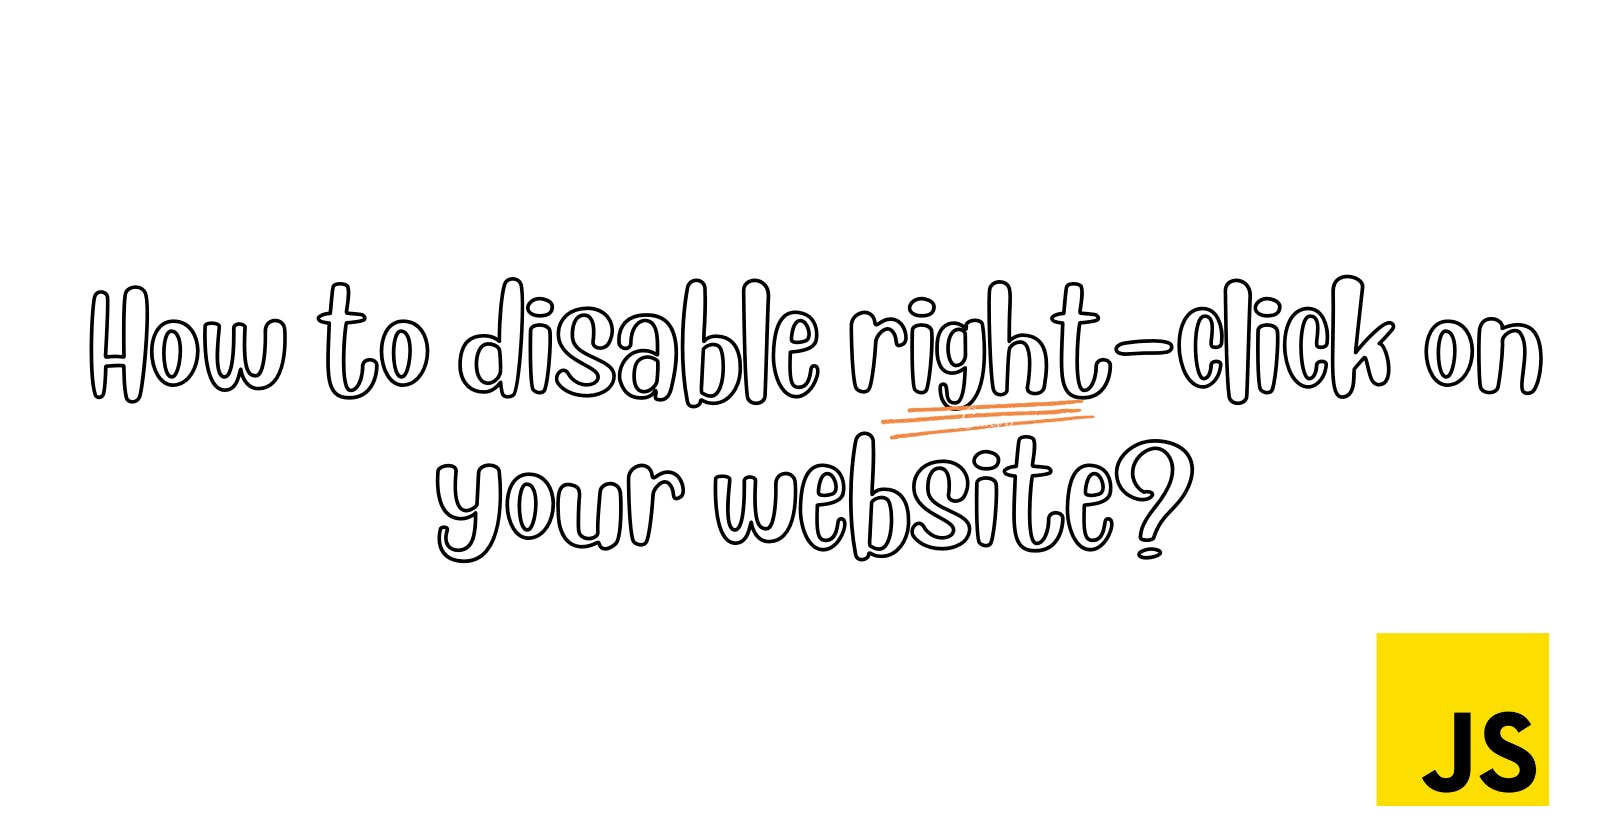 How to disable right-click on your website?